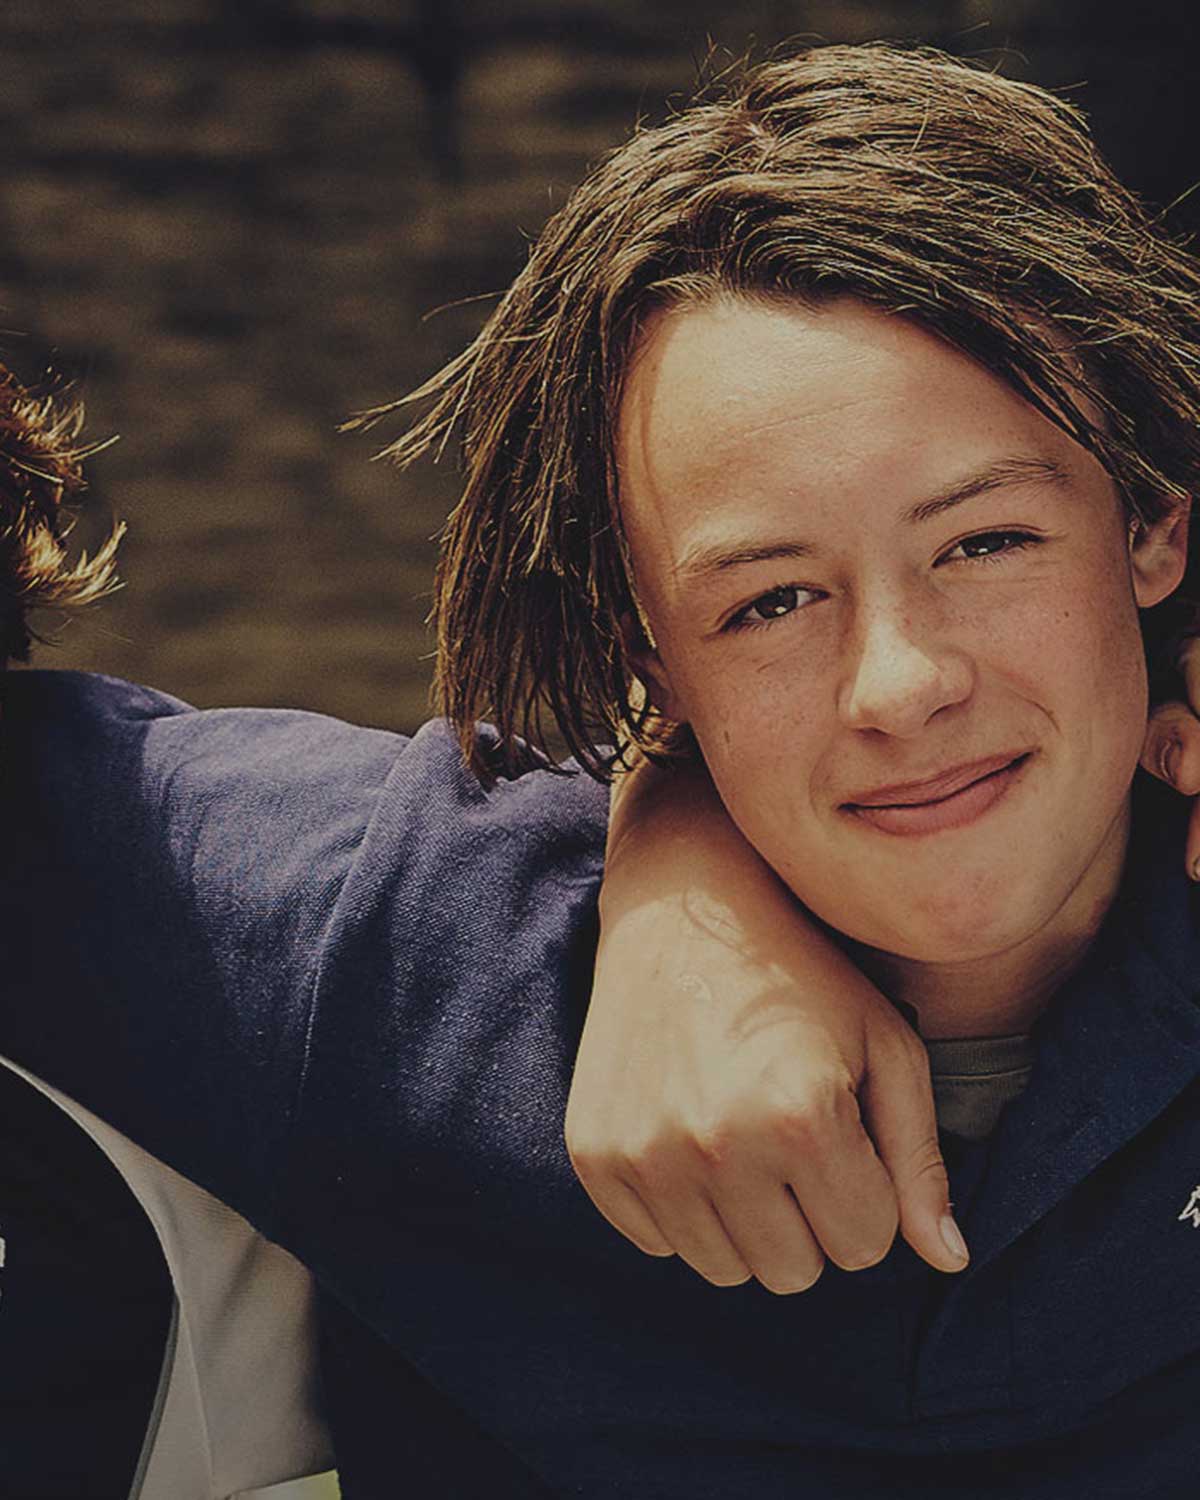 A school aged boy facing the camera and smiling, with his arm around a friend